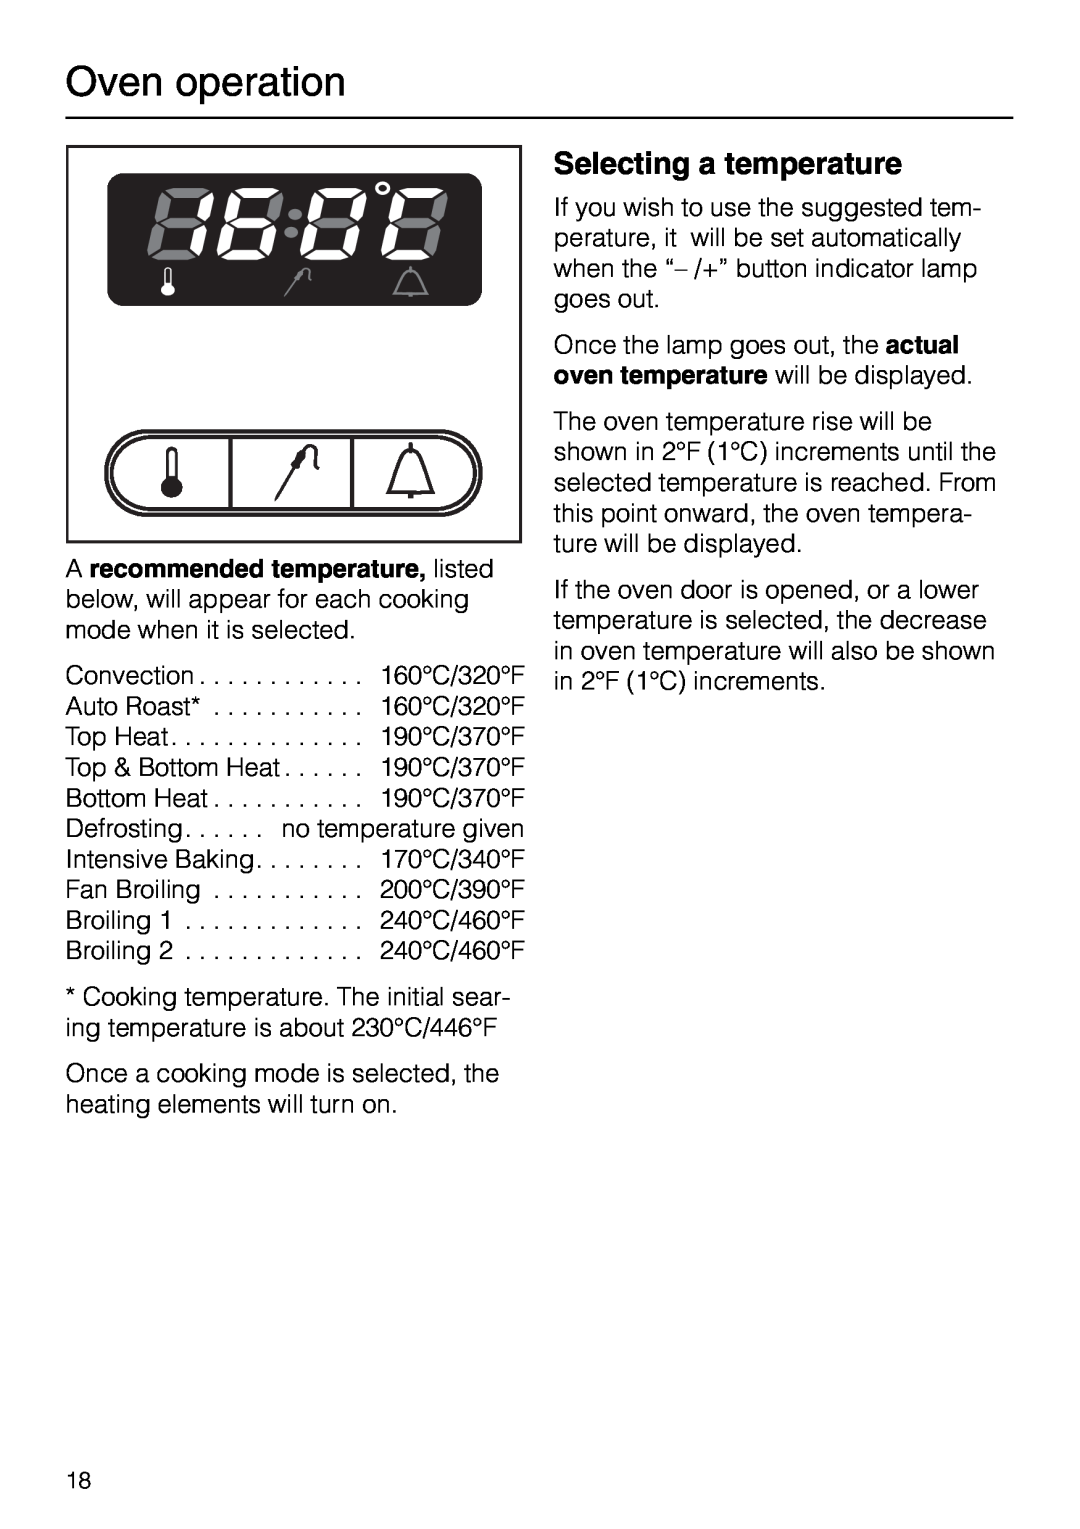 Miele H 267 B, H 277 B manual Selecting a temperature, Oven operation 